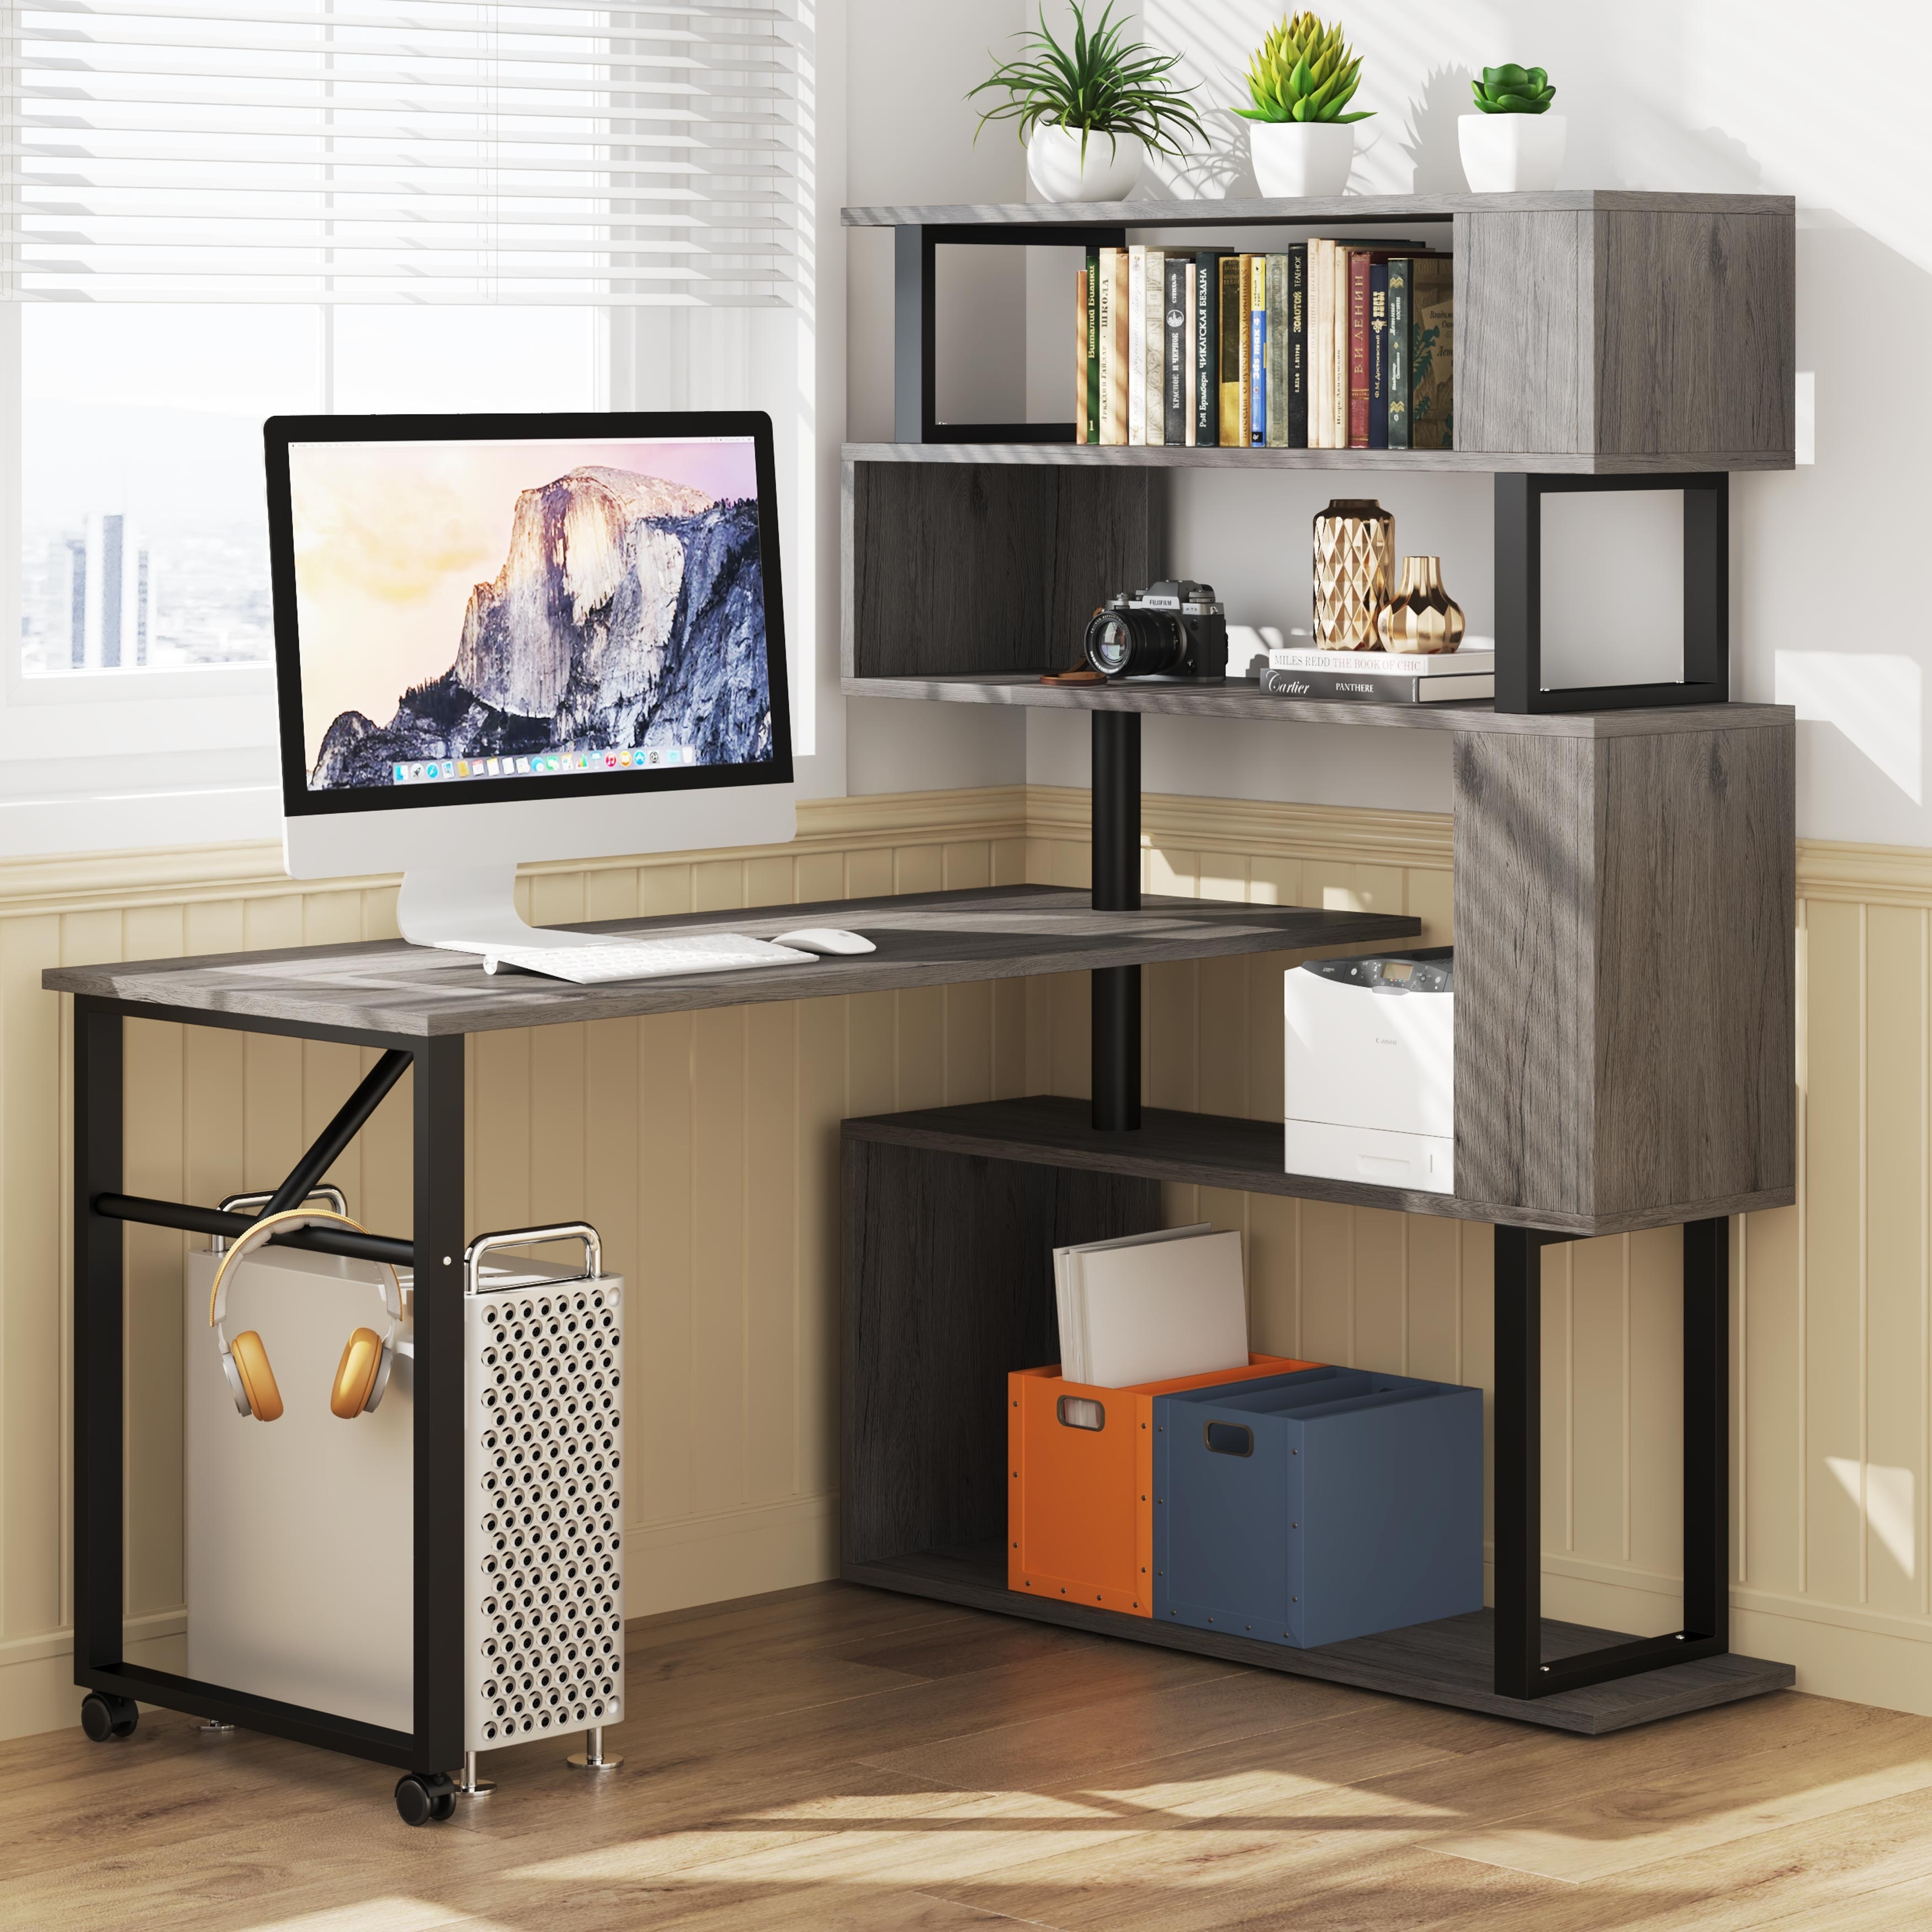 https://ak1.ostkcdn.com/images/products/is/images/direct/30f1257fb7c483e42448a273fce6f92a035a6dc7/Rotating-Computer-Desk%2C-L-Shaped-Corner-Desk-with-Storage%2CHome-Office-Desk.jpg